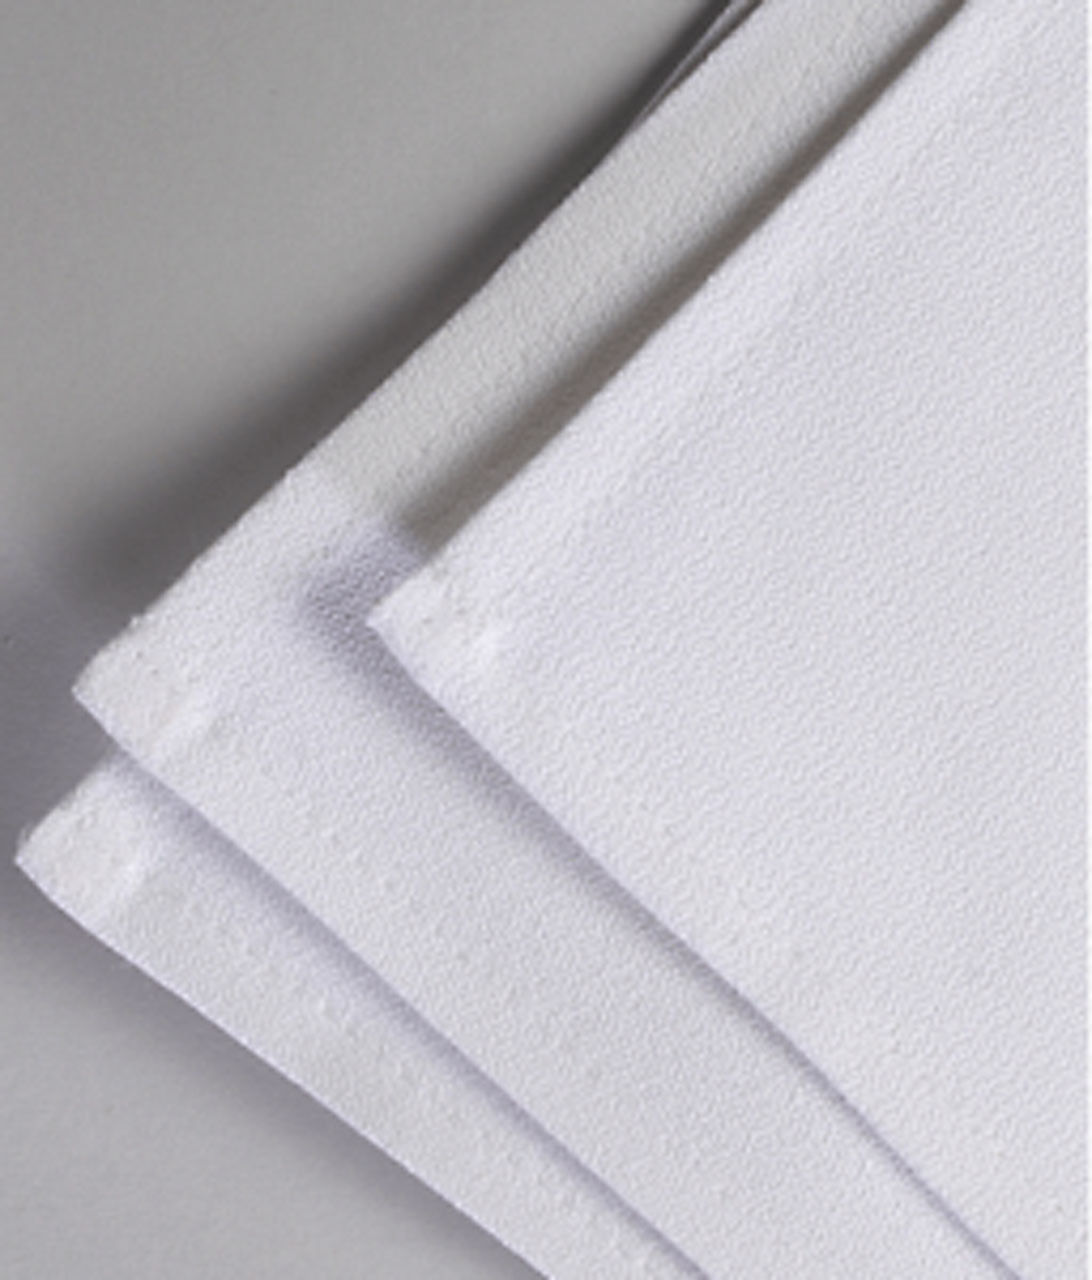 What is the laundering process for the Cotton Momie Square Table Linens?